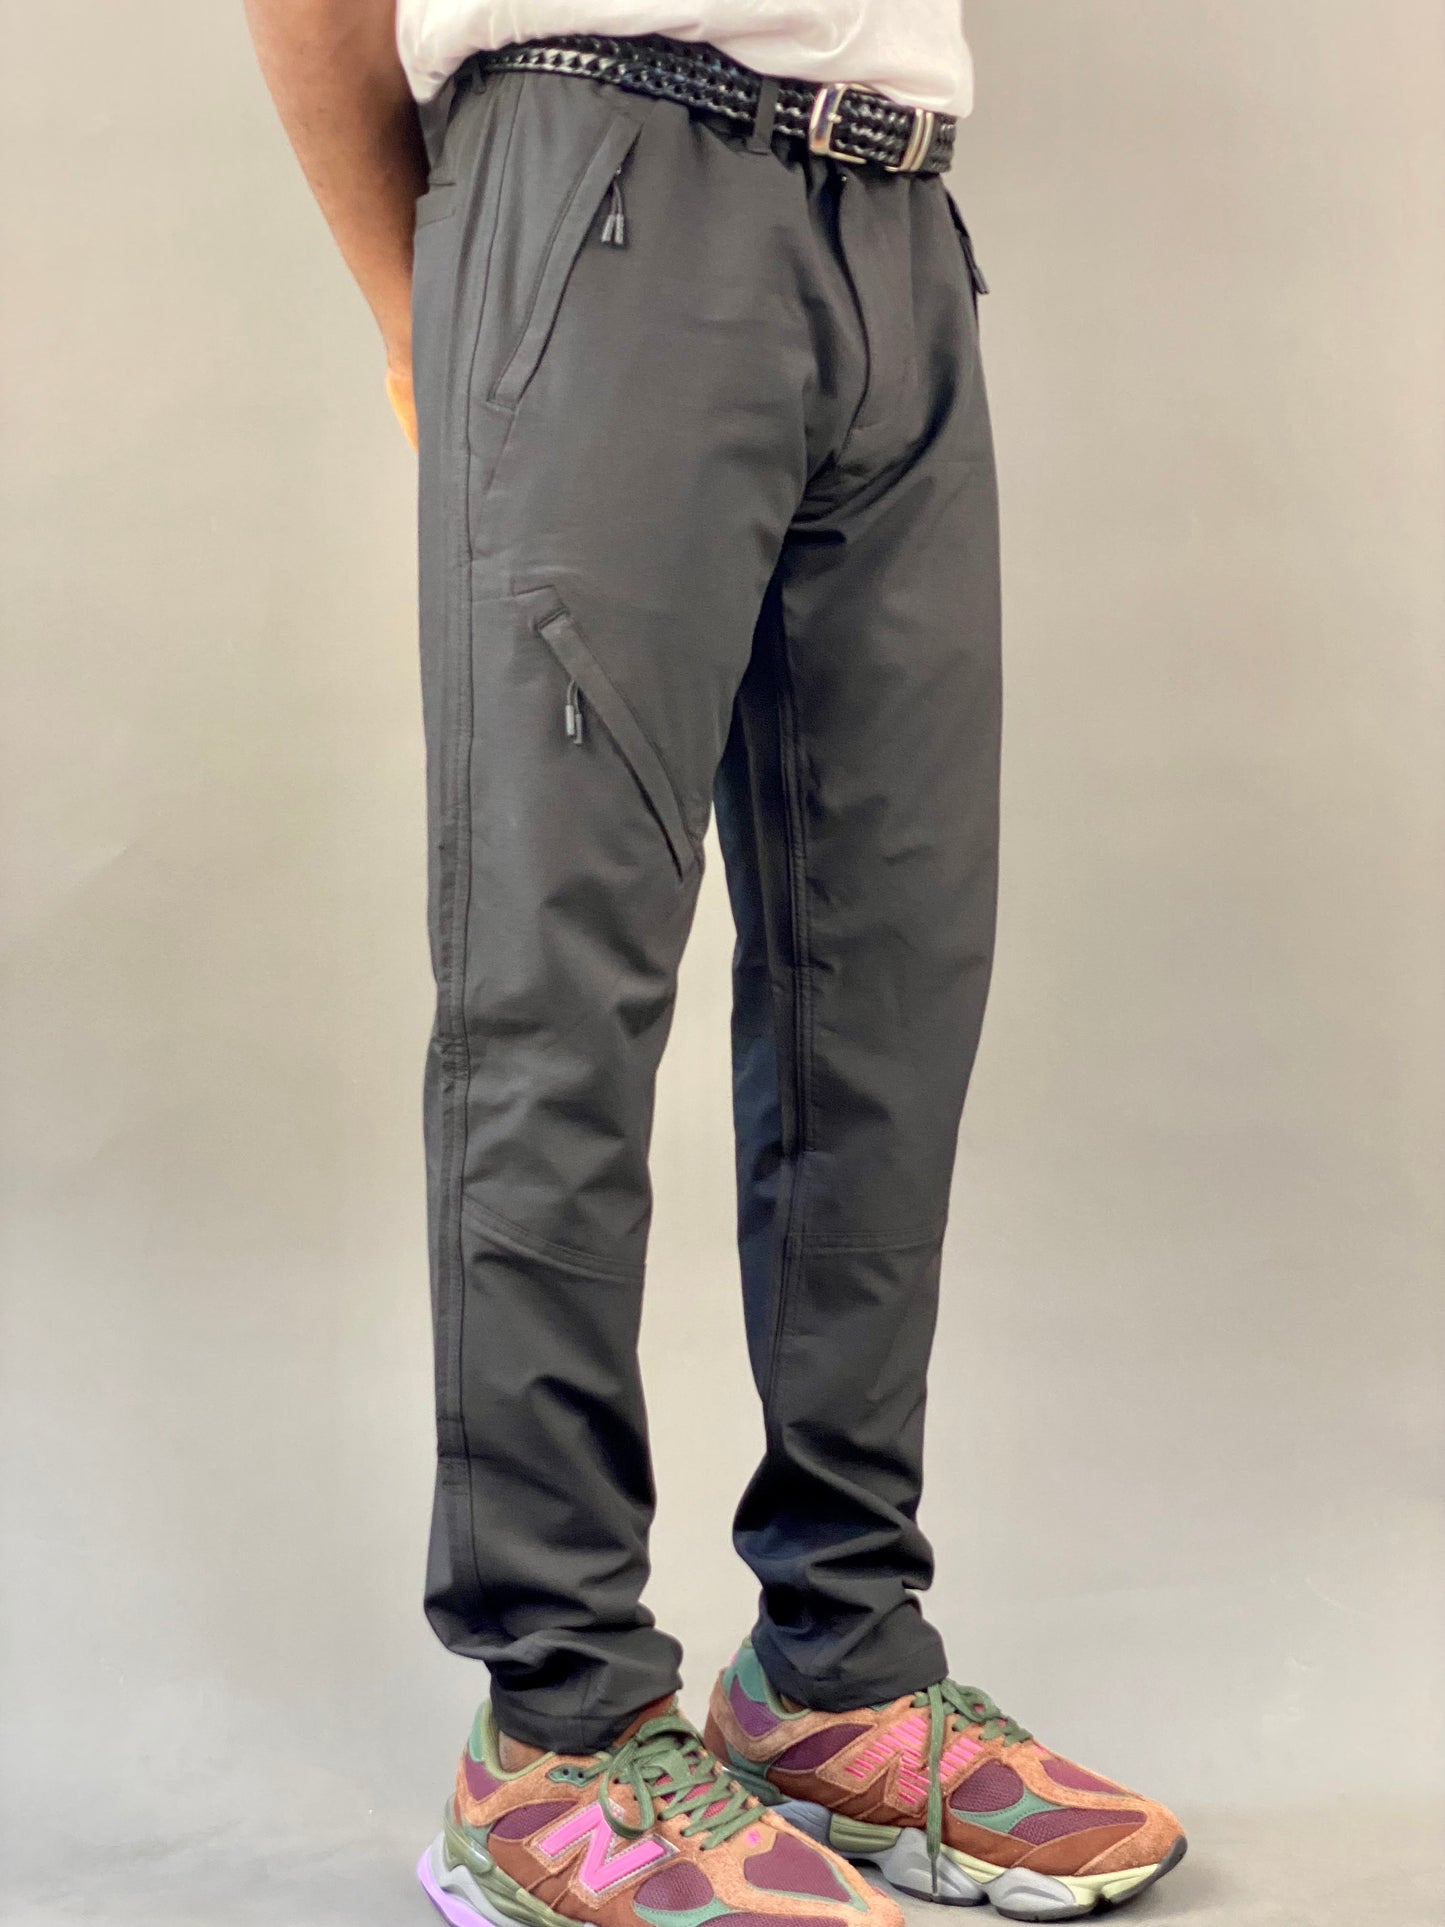 Easy tapered fit pant in black